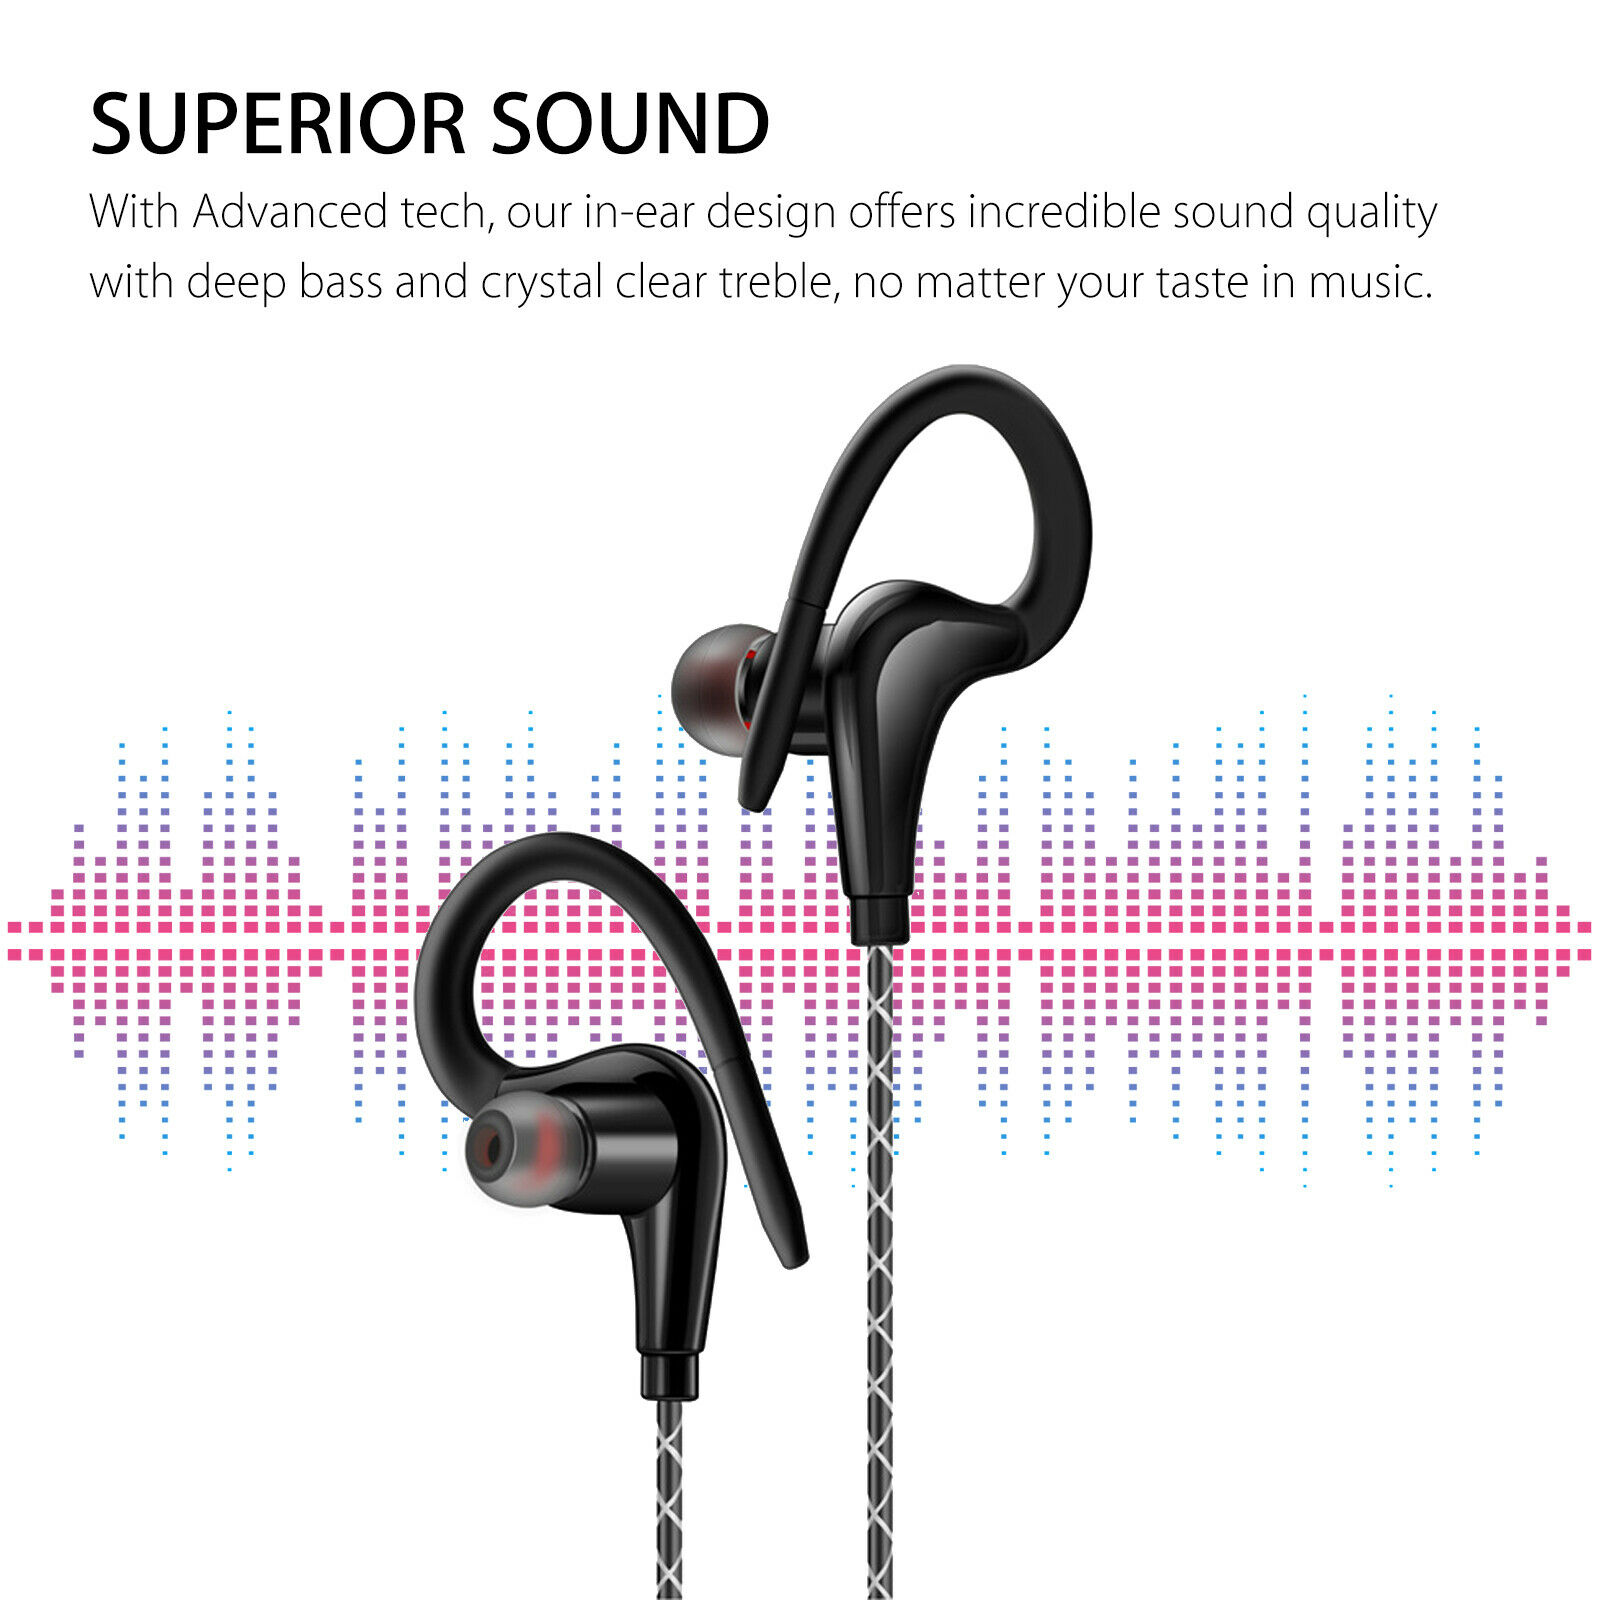 Wired Earbuds, Earbuds with Microphone and Volume Control, in Ear Ergonomic Noise Isolating Headphones, Earphones with 3.5mm Jack,Powerful Bass Sound - image 3 of 8